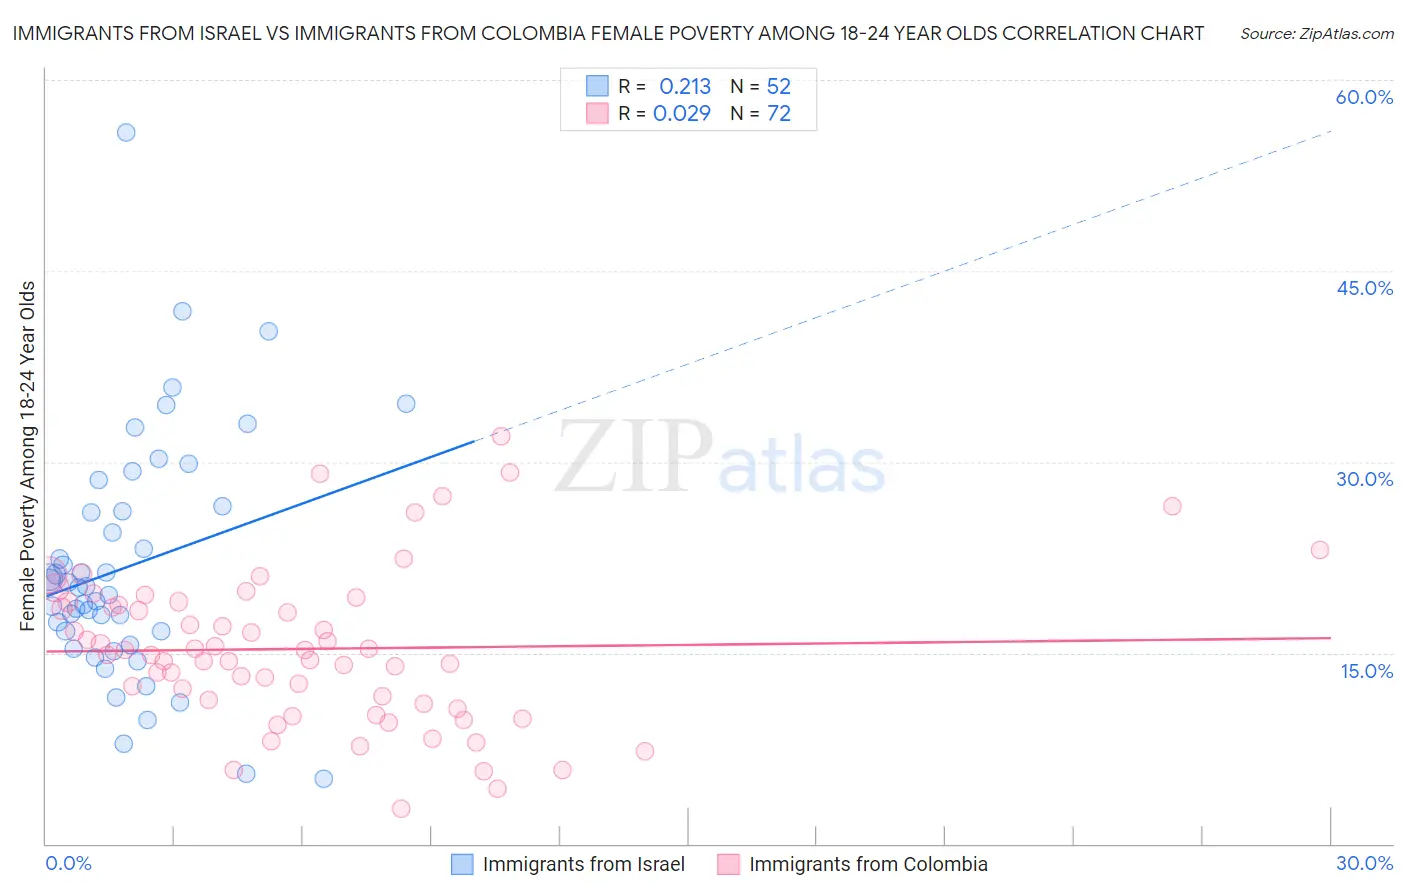 Immigrants from Israel vs Immigrants from Colombia Female Poverty Among 18-24 Year Olds